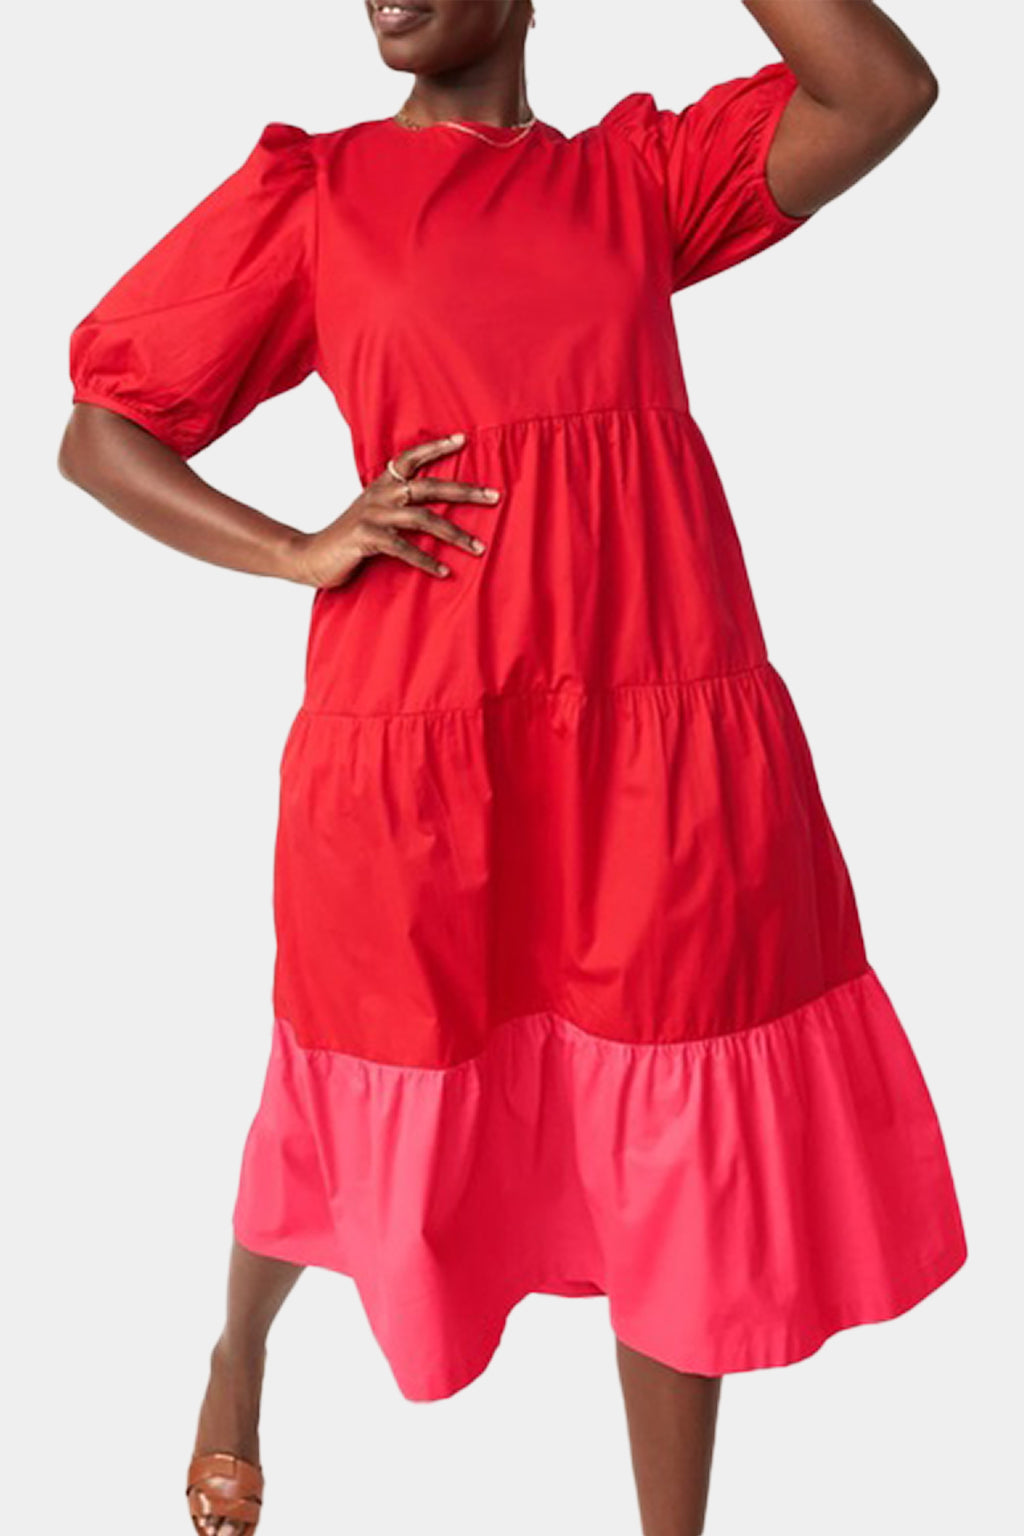 Old Navy - Colorblocked Tiered Dress